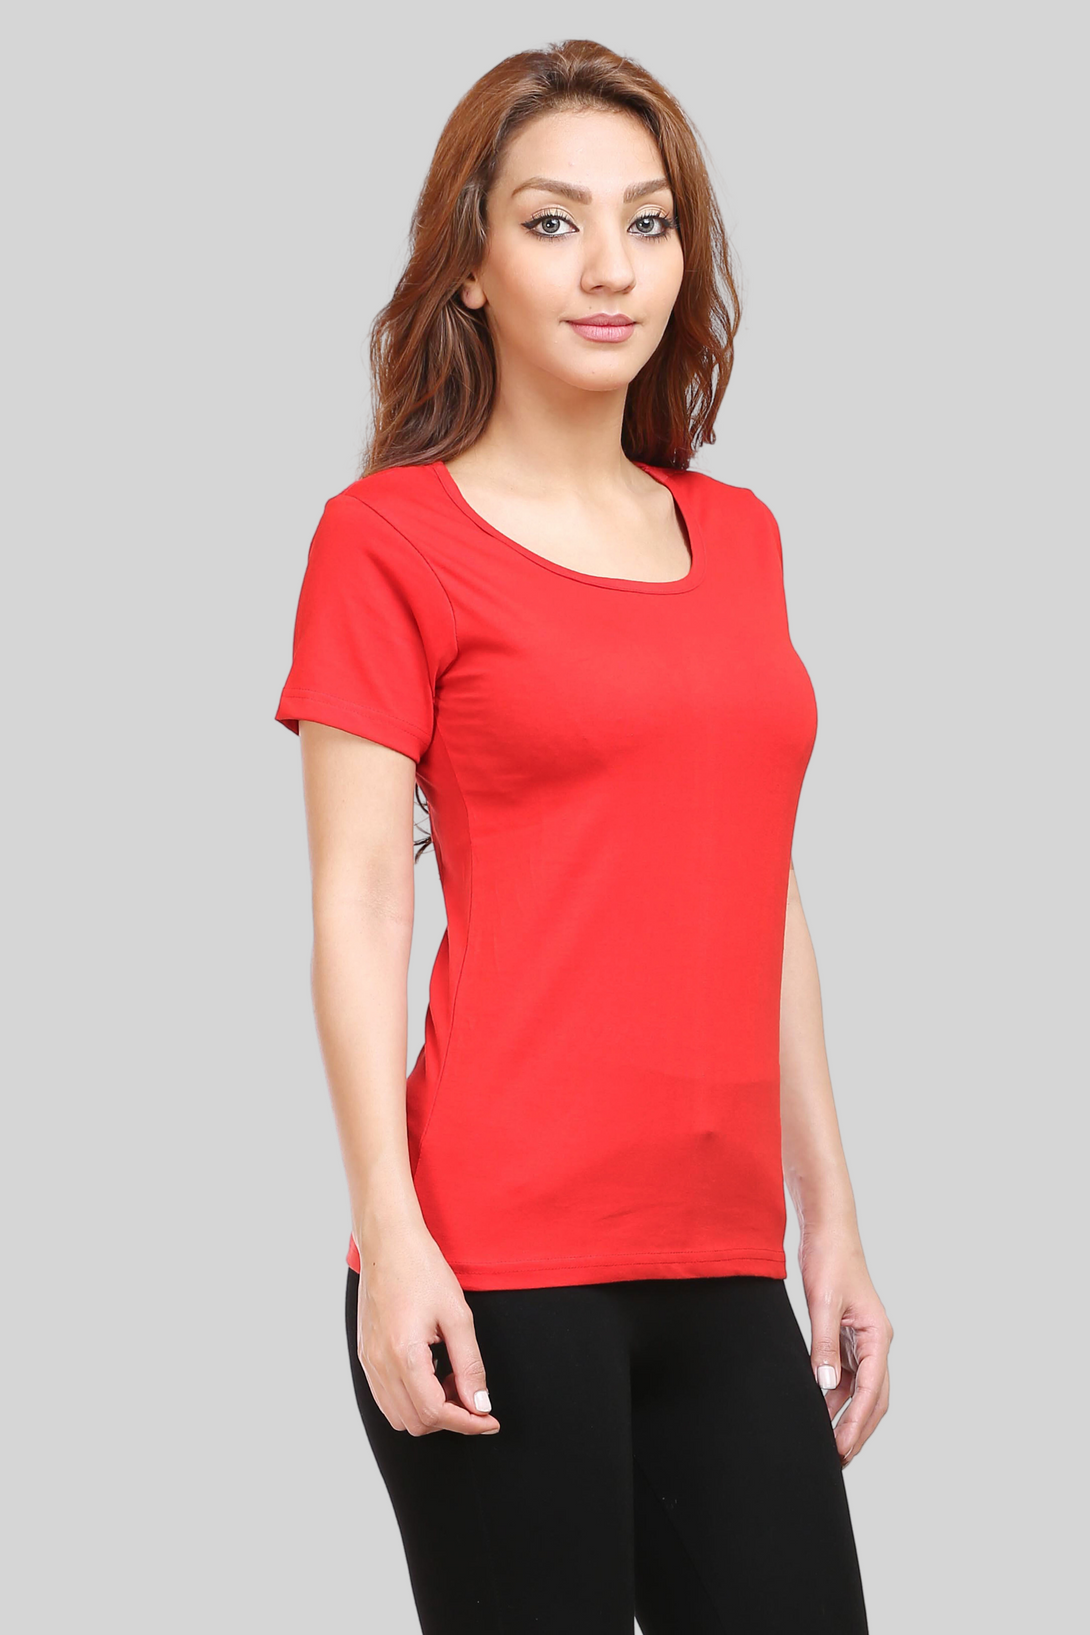 Red Scoop Neck T-Shirt For Women - WowWaves - 1